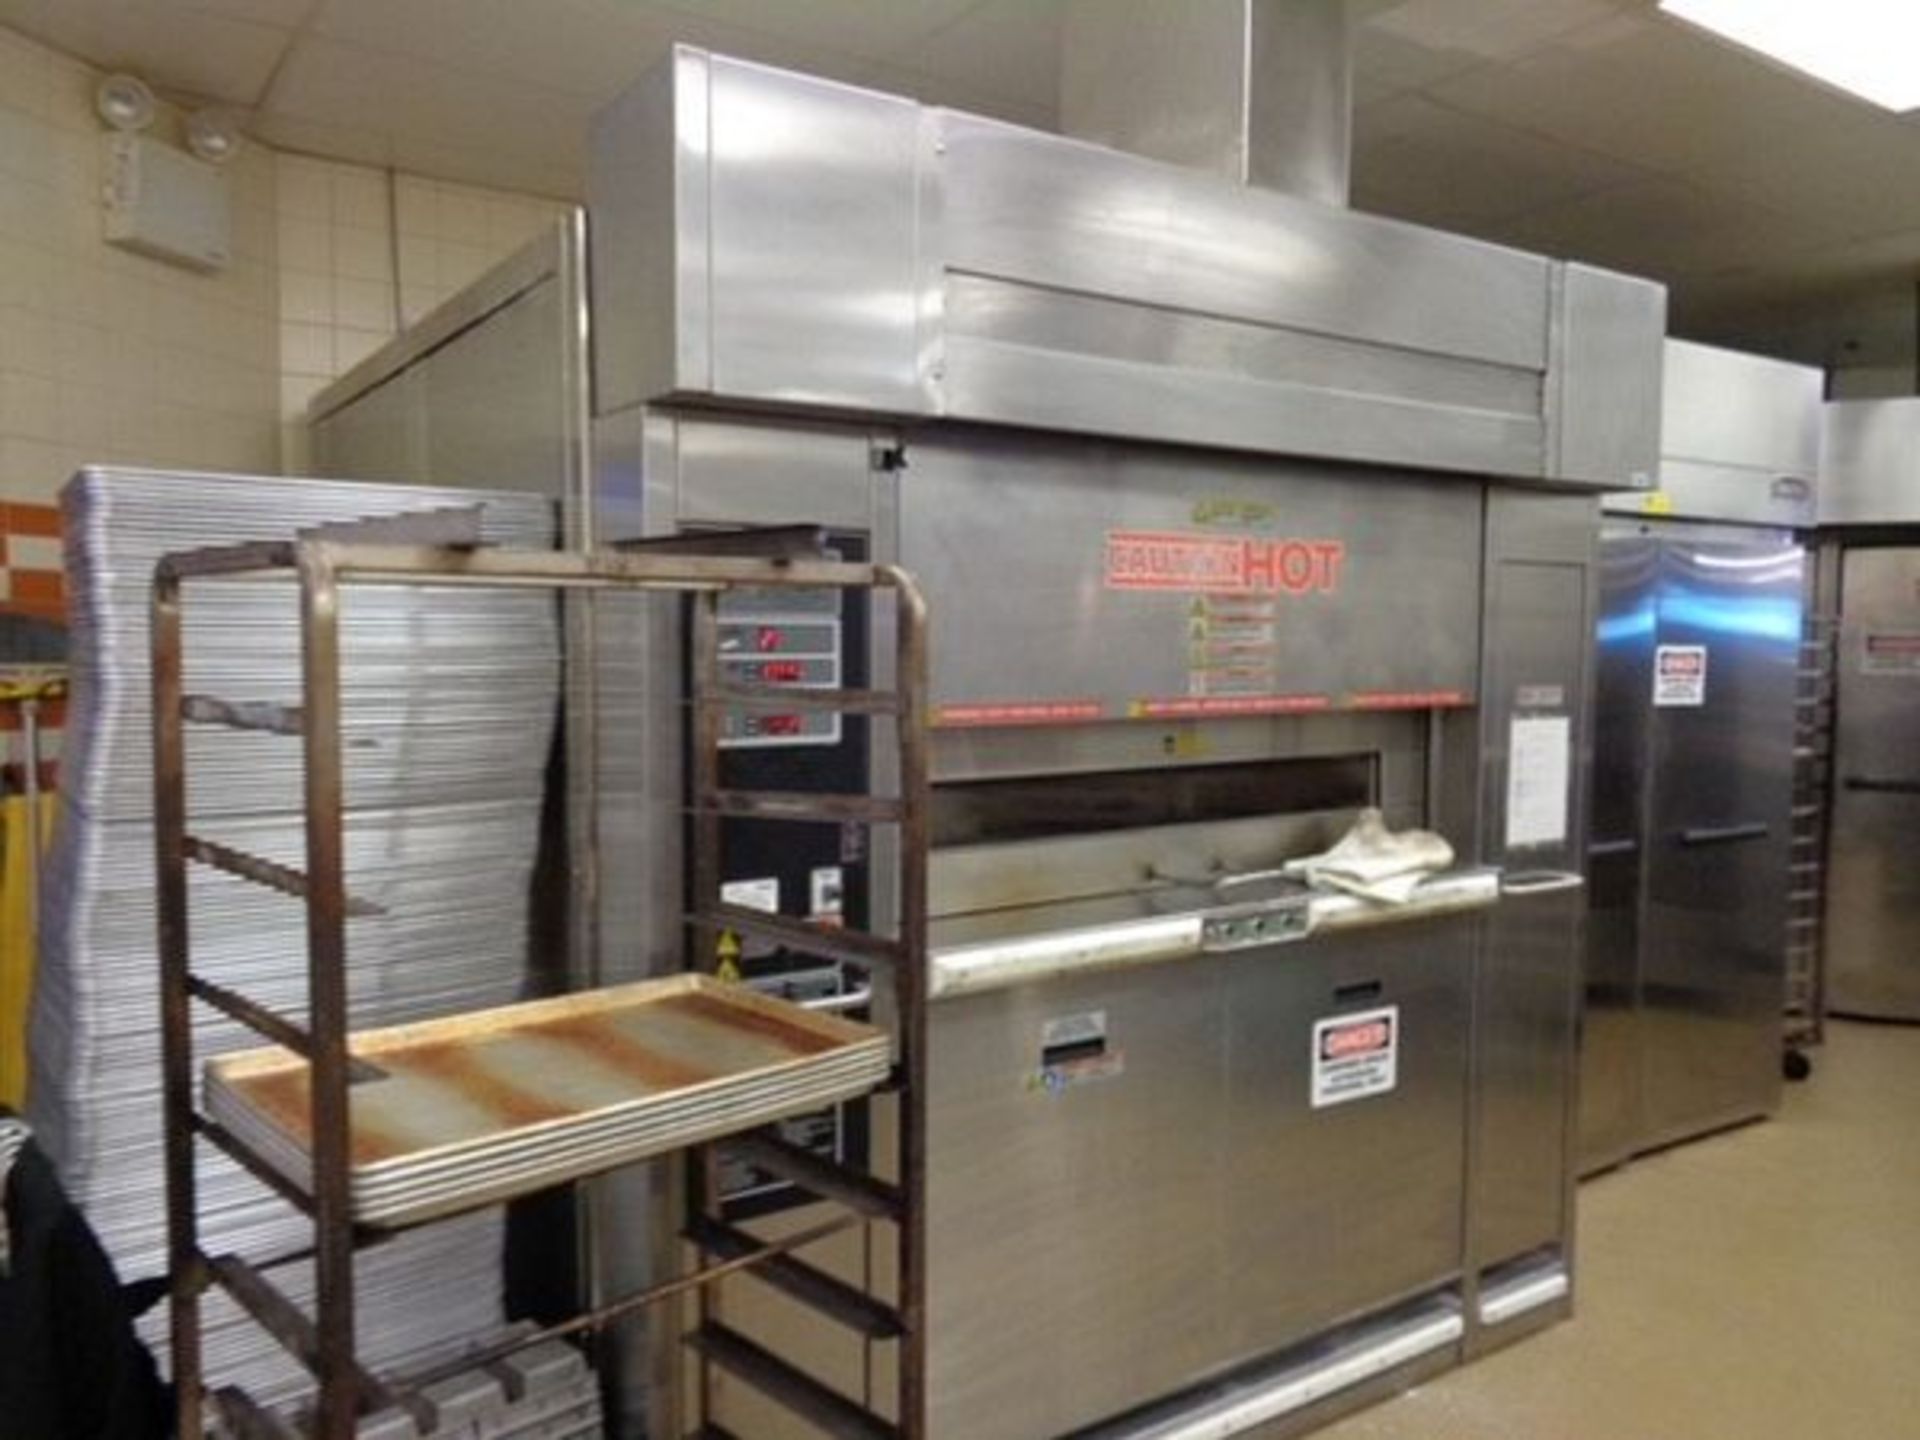 Baxter Revolving Tray Oven, Gas-Unit was used for approx 3 years & is palletized on 3 skids. NOTICE